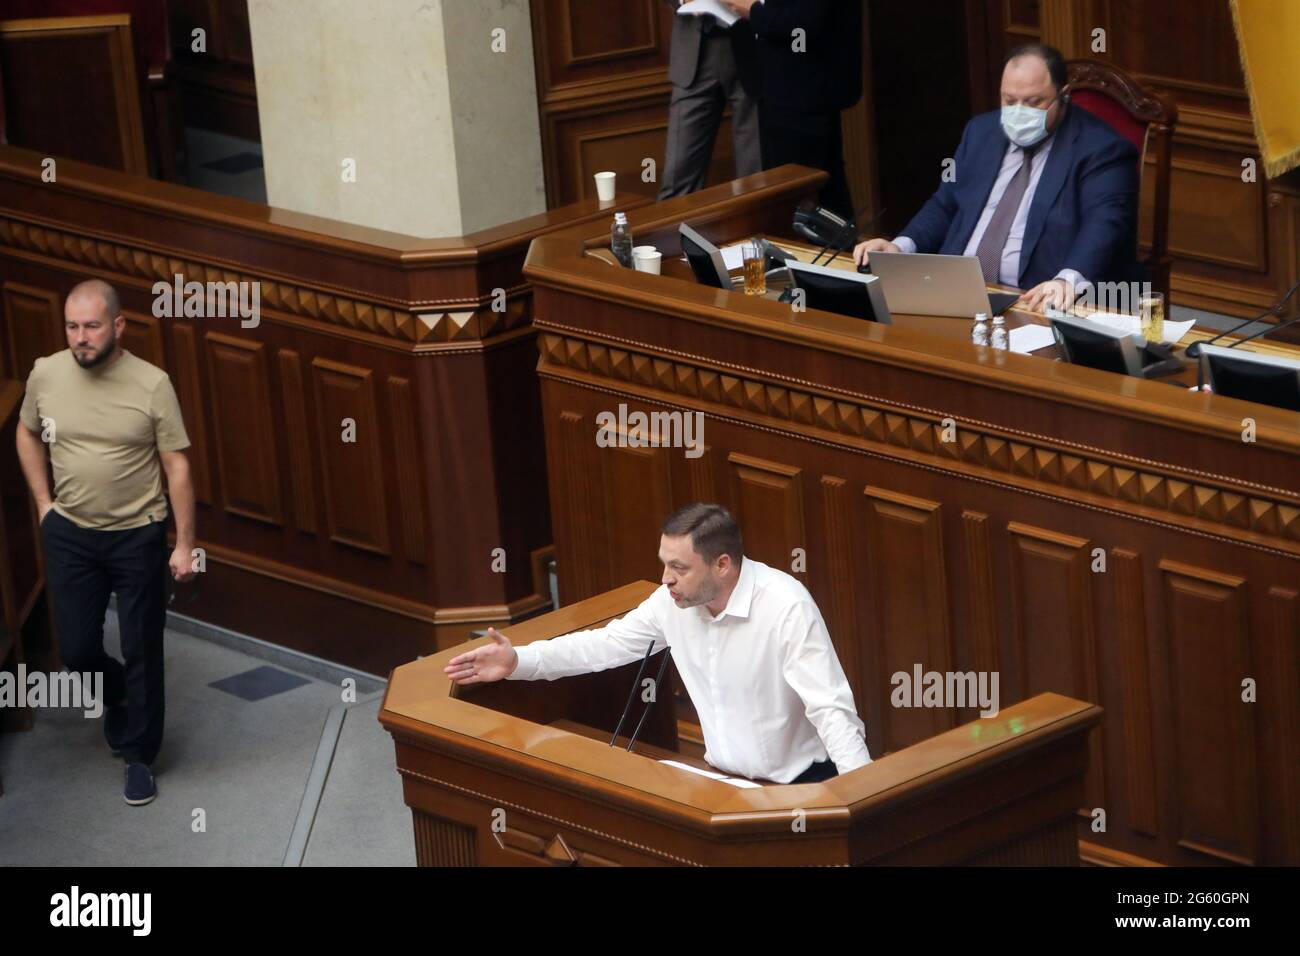 KYIV, UKRAINE - JULY 1, 2021 - Servant of the People MP Denys Monastyrskyi speaks from the rostrum during a regular sitting of the Ukrainian parliamen Stock Photo